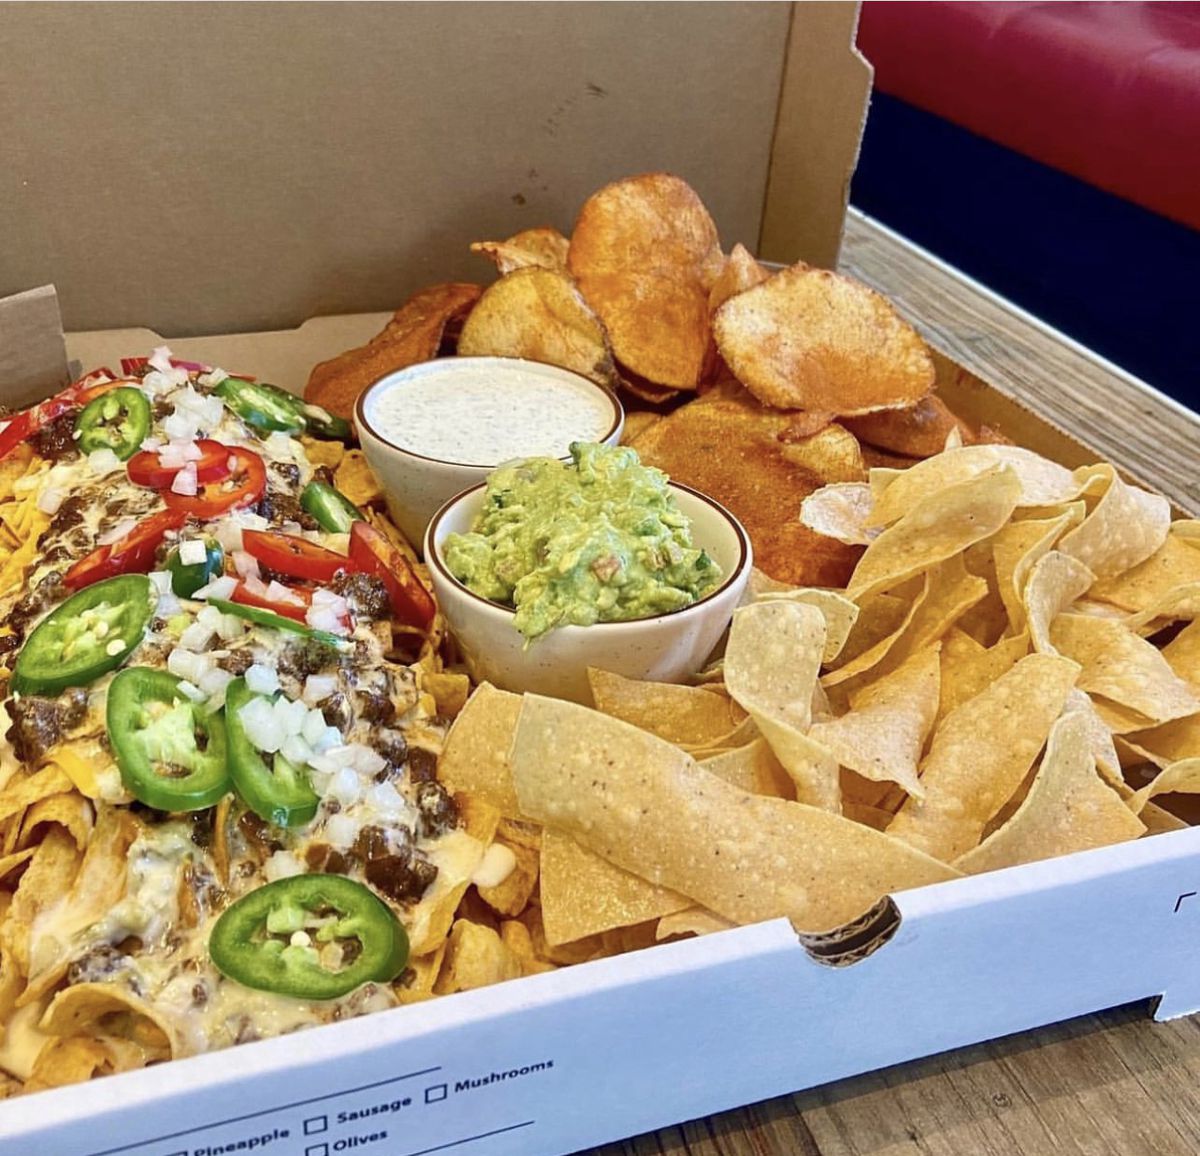 State Fare Kitchen & Bar’s party box, which includes tortilla chips with salsa, seasoned chips and pickle dip, and a Frito pie loaded with jalapenos, onions, peppers, and cheese.